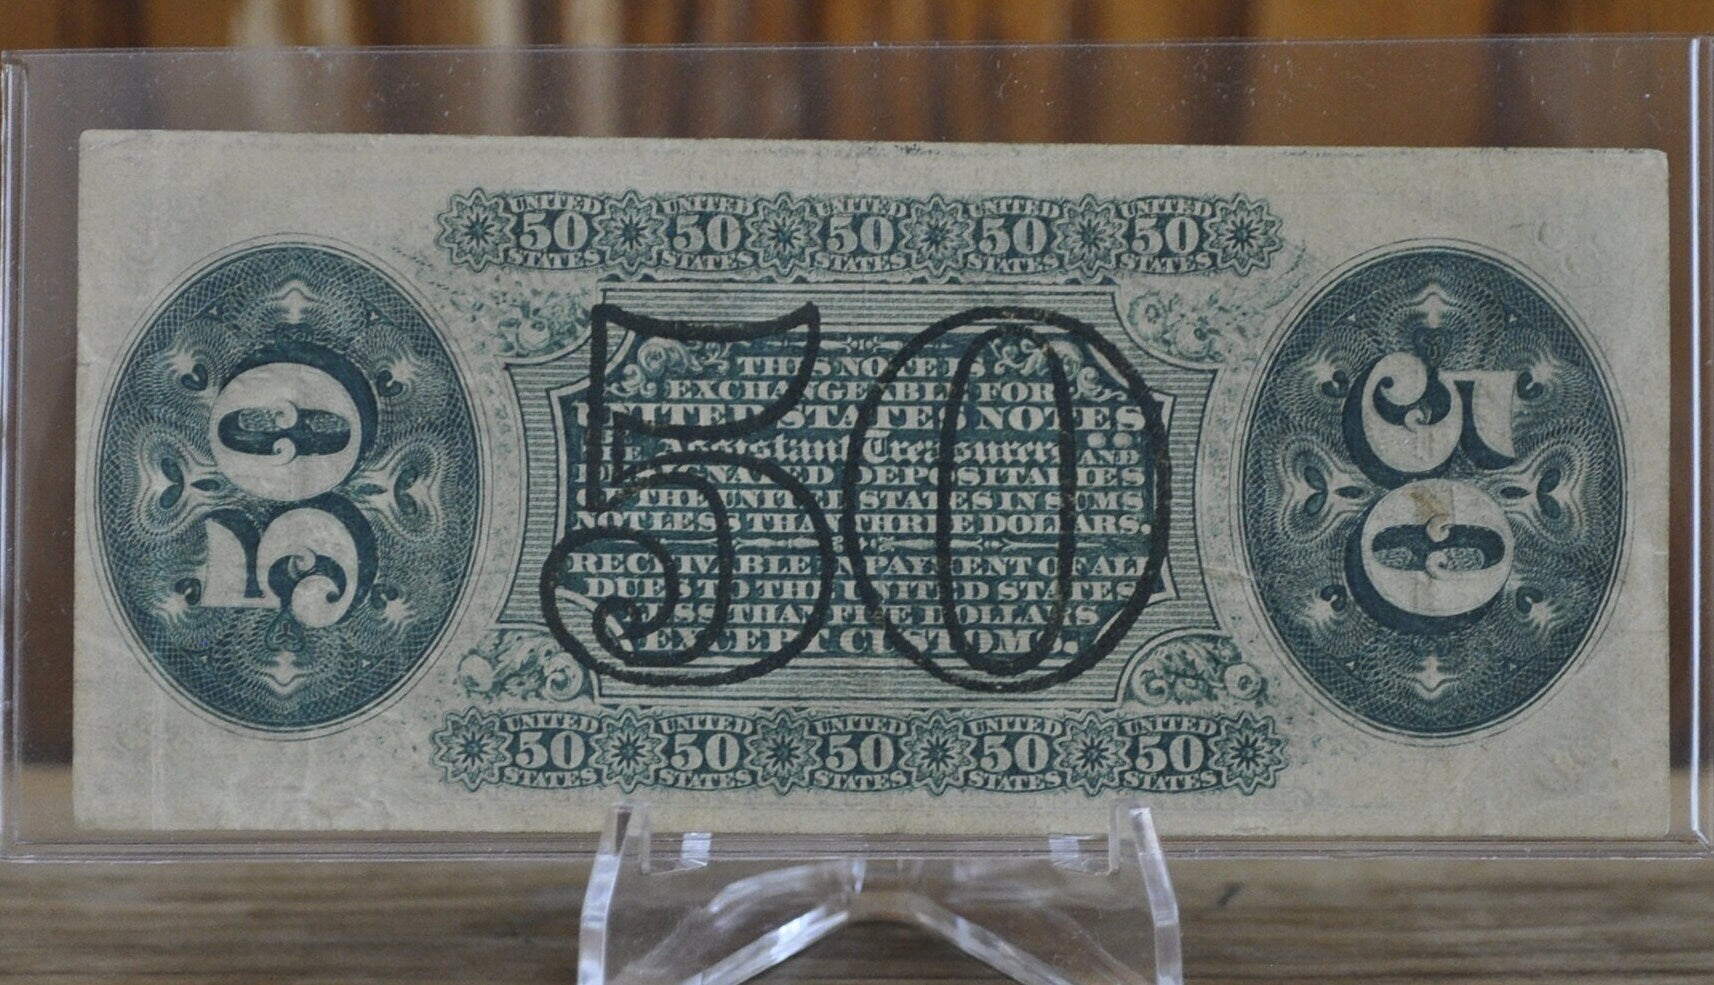 50 Cent Fractional Note Fr#1334 XF Grade / Condition - &quot;a&quot; on obverse, no surcharge, green reverse - Third Issue Fractional Note Fifty Cent